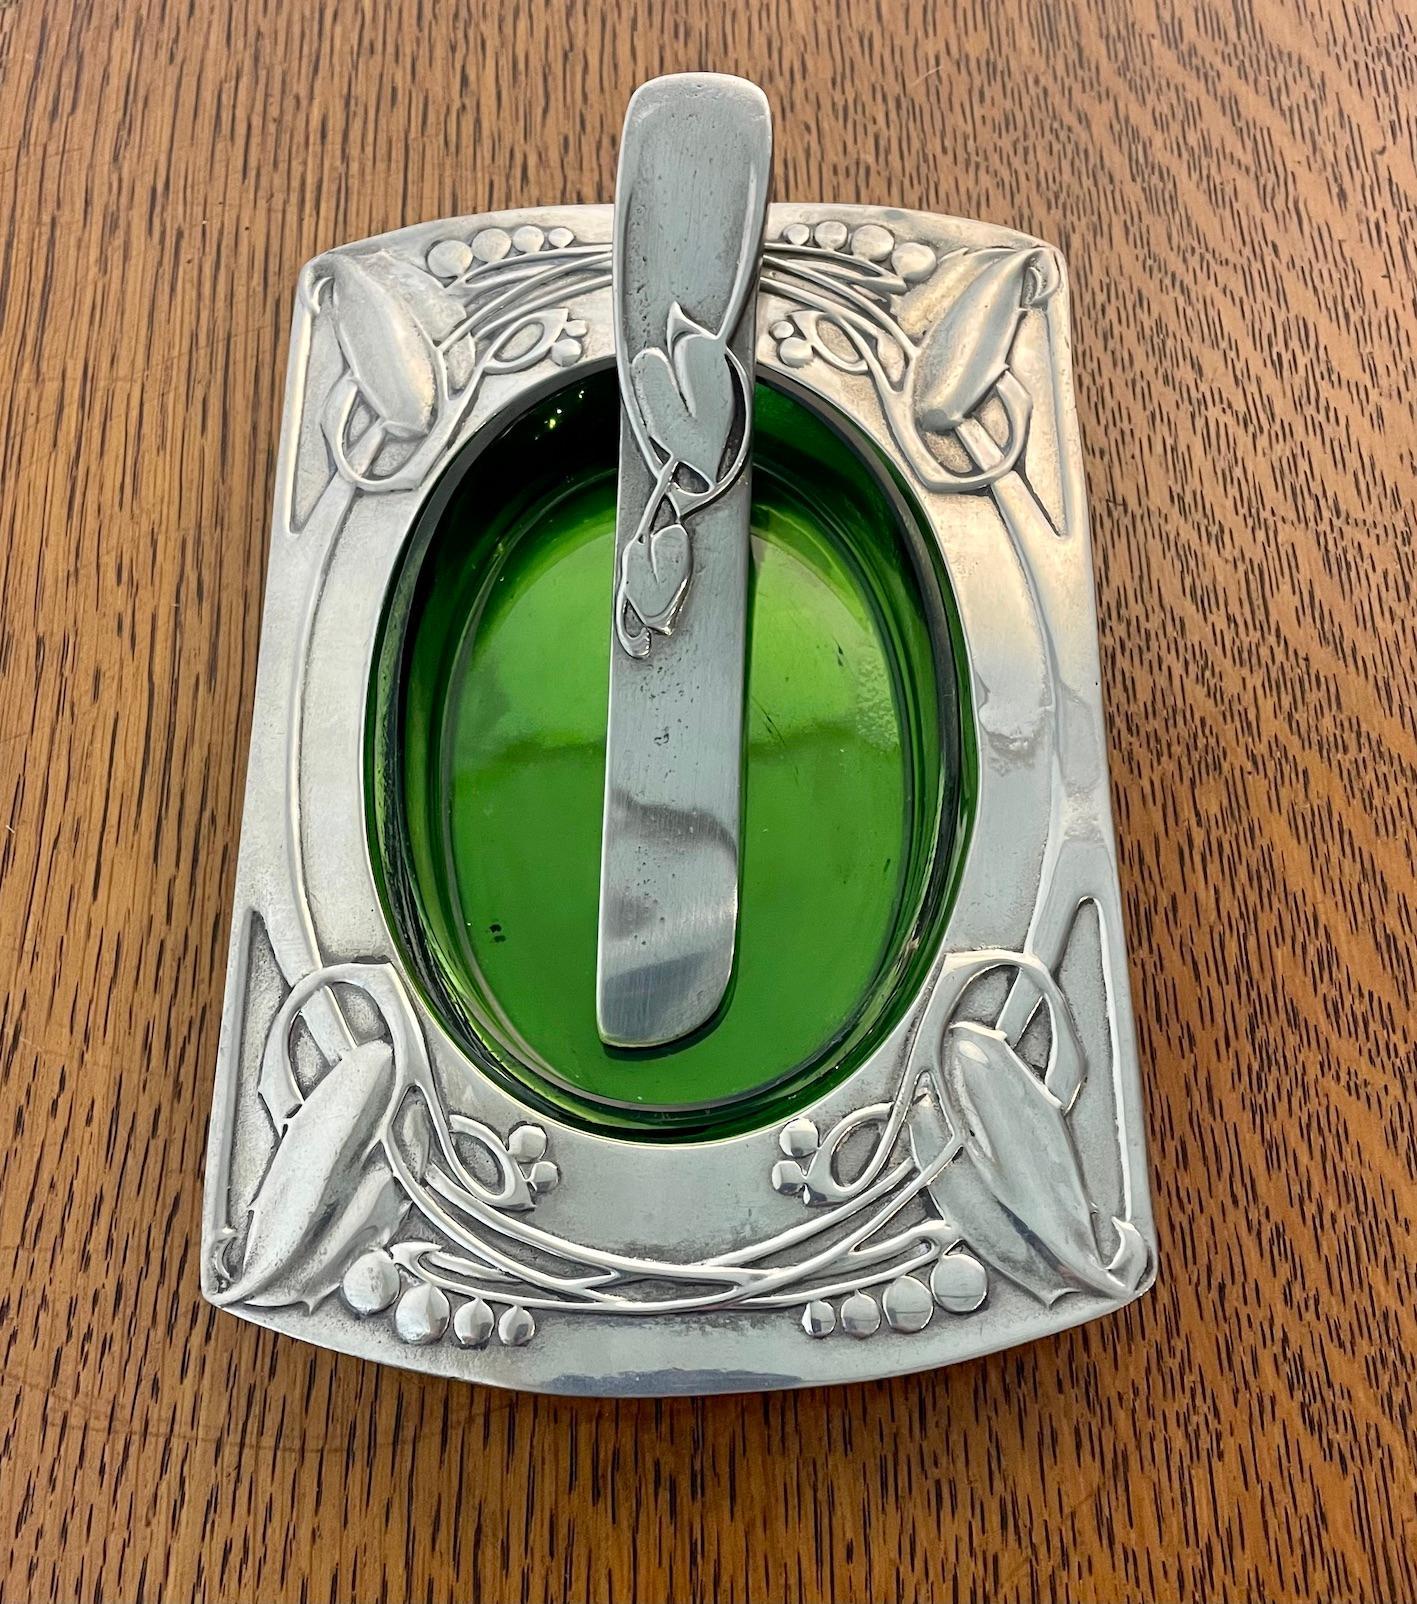 A fabulous Arts & Crafts butter dish and matching knife with the original green glass liner
The stylised Celtic decoration is a signature of the designer Archibald Knox
Retailed by Liberty & Co
Circa 1905
Marked Solketts

Archibald Knox 1864 -